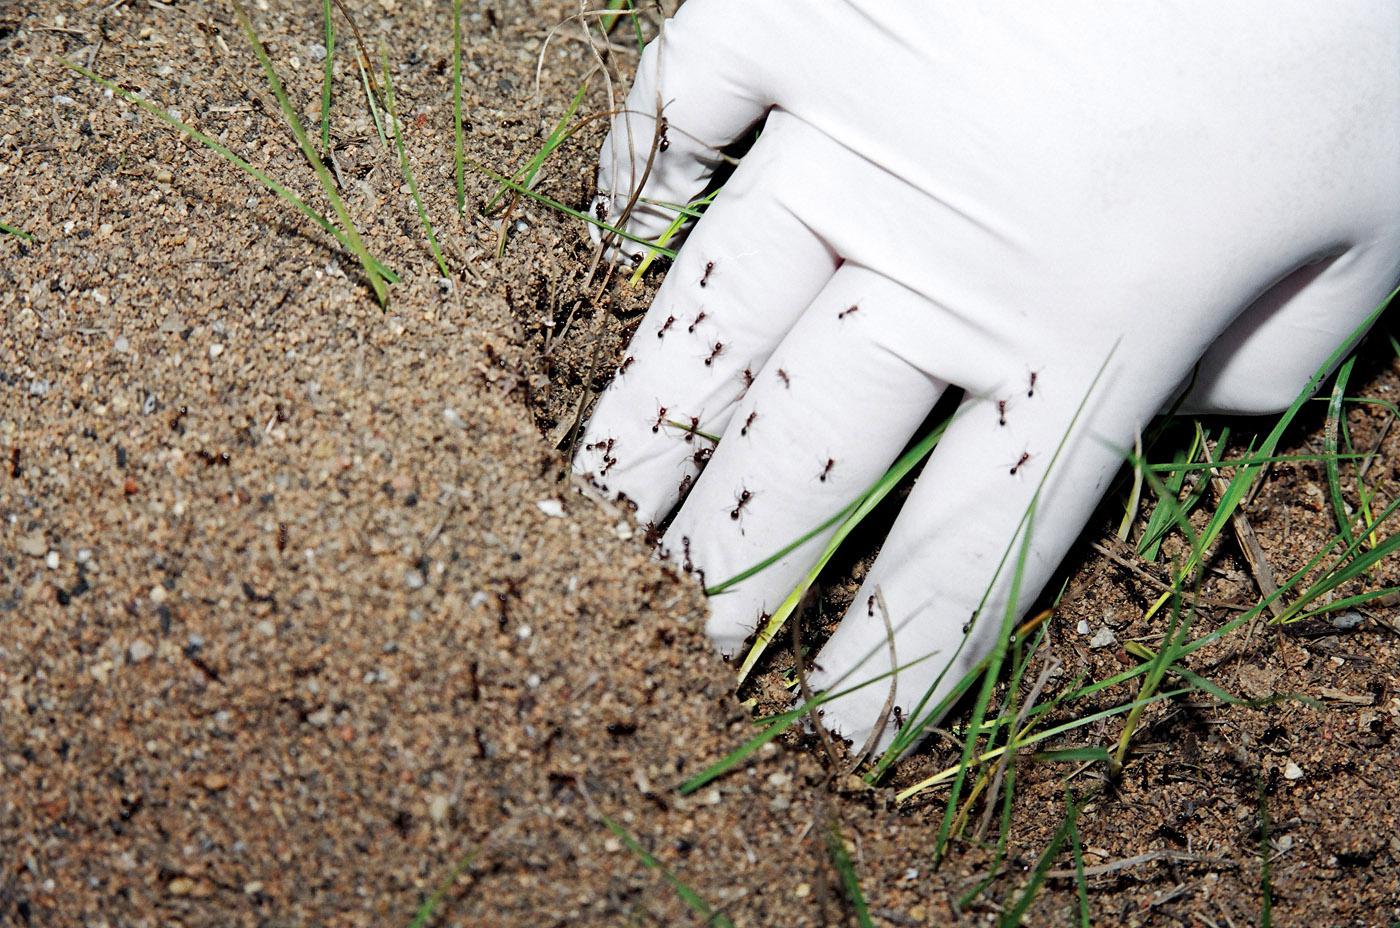 Invasions by imported fire ants are painful experiences for commercial agriculture and private individuals across the state. (Photo by Marco Nicovich)